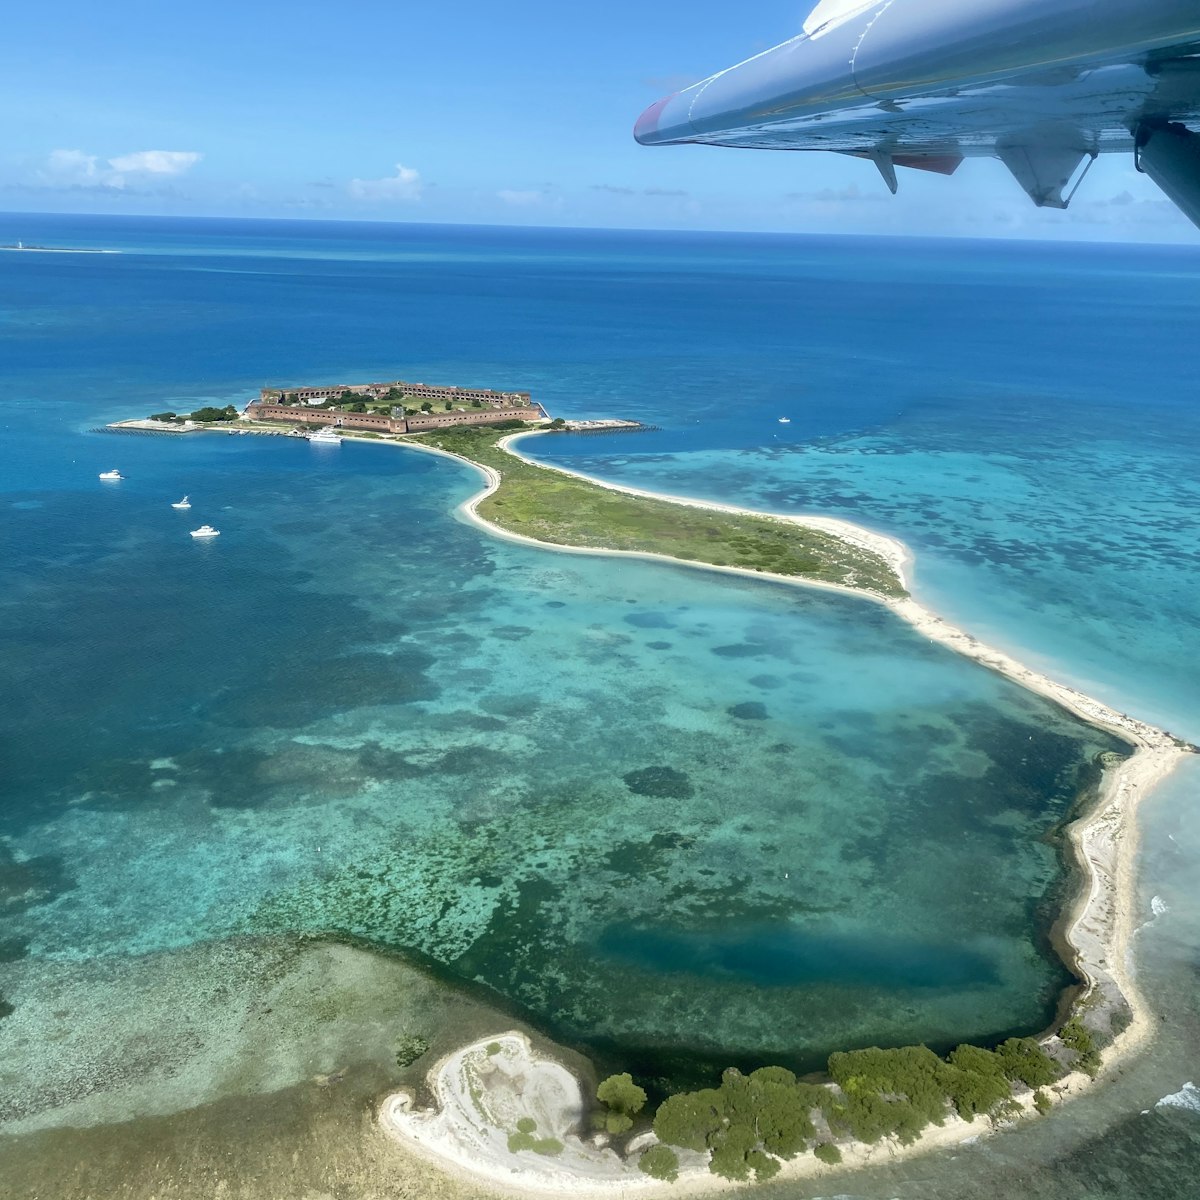 Flying to Dry Tortugas National Park